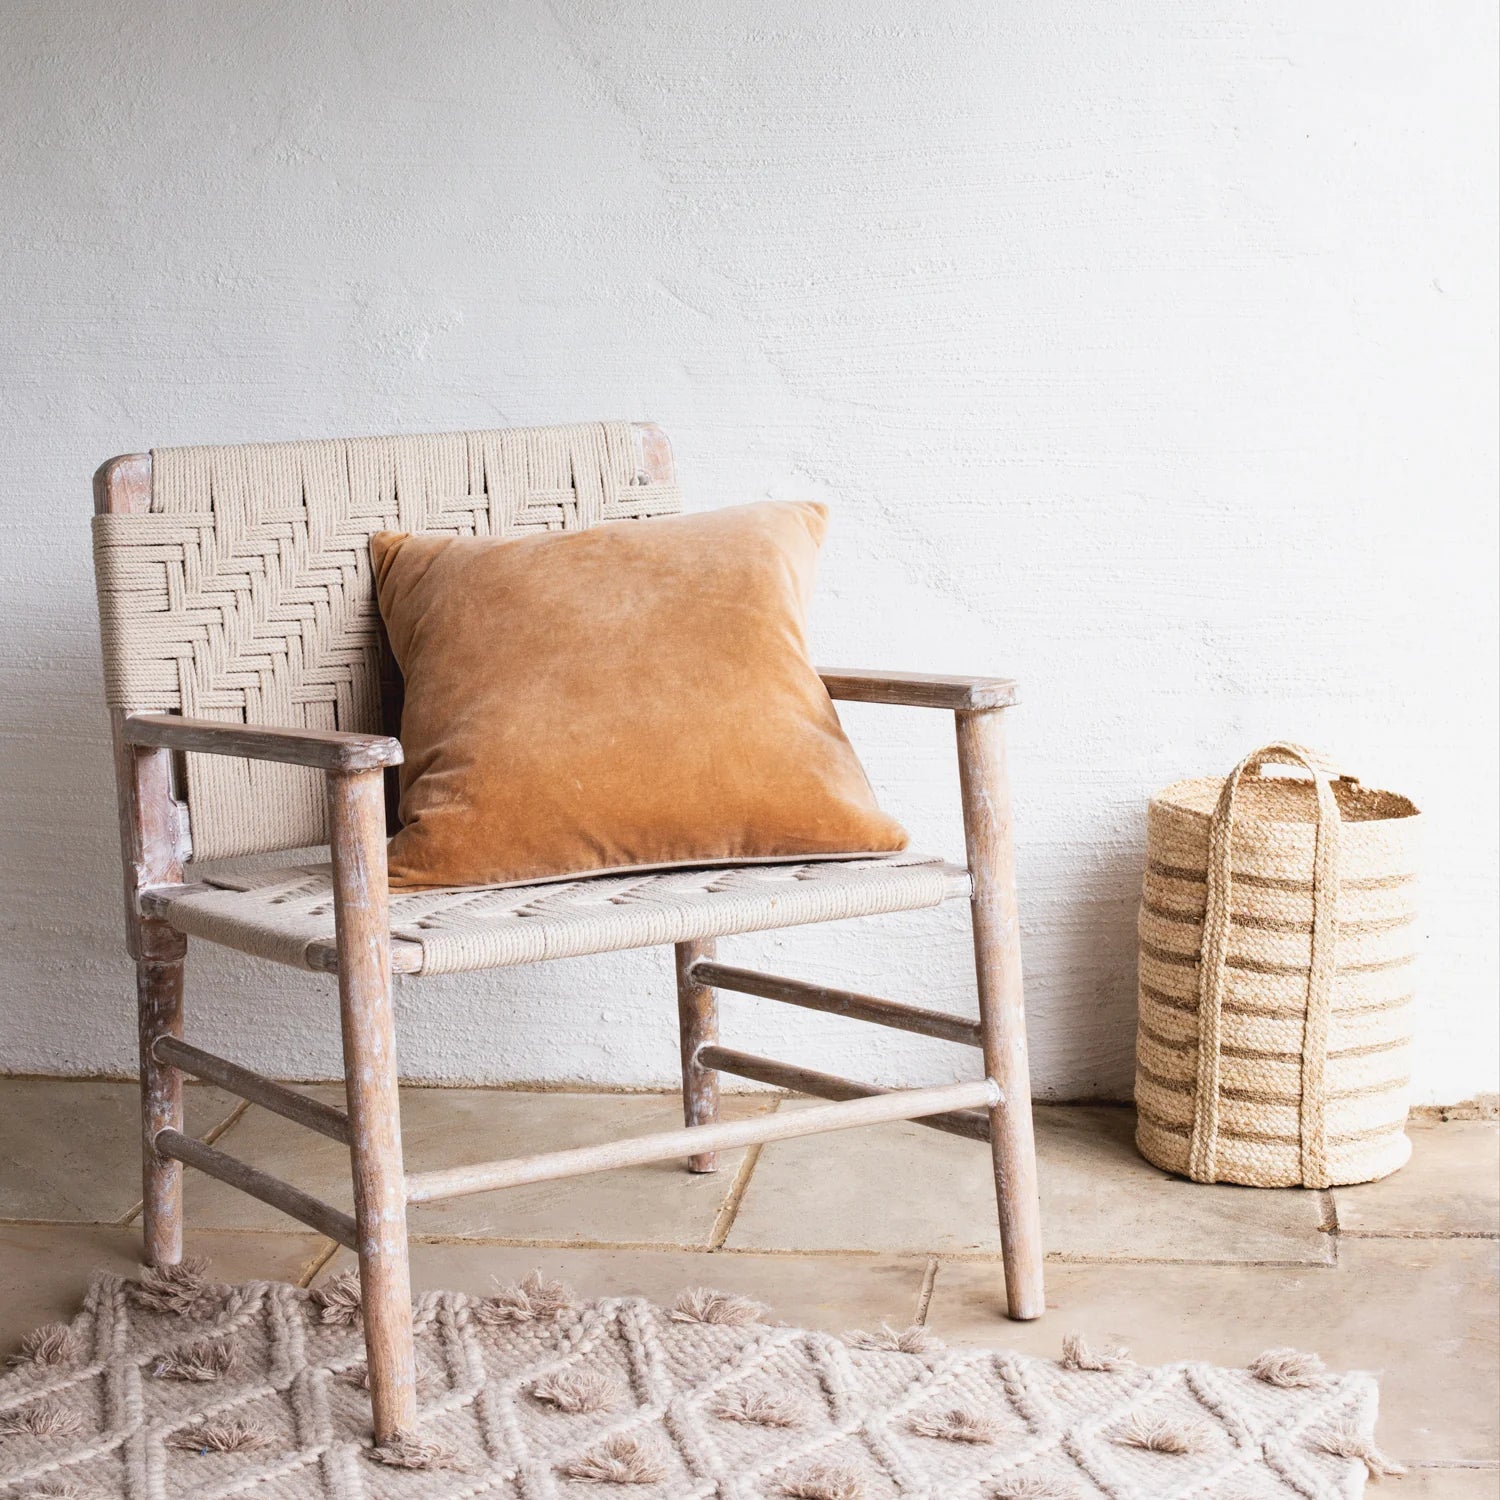 The Lulworth Rustic Wooden Armchair styled with an orange velvet cushion and a small basket.